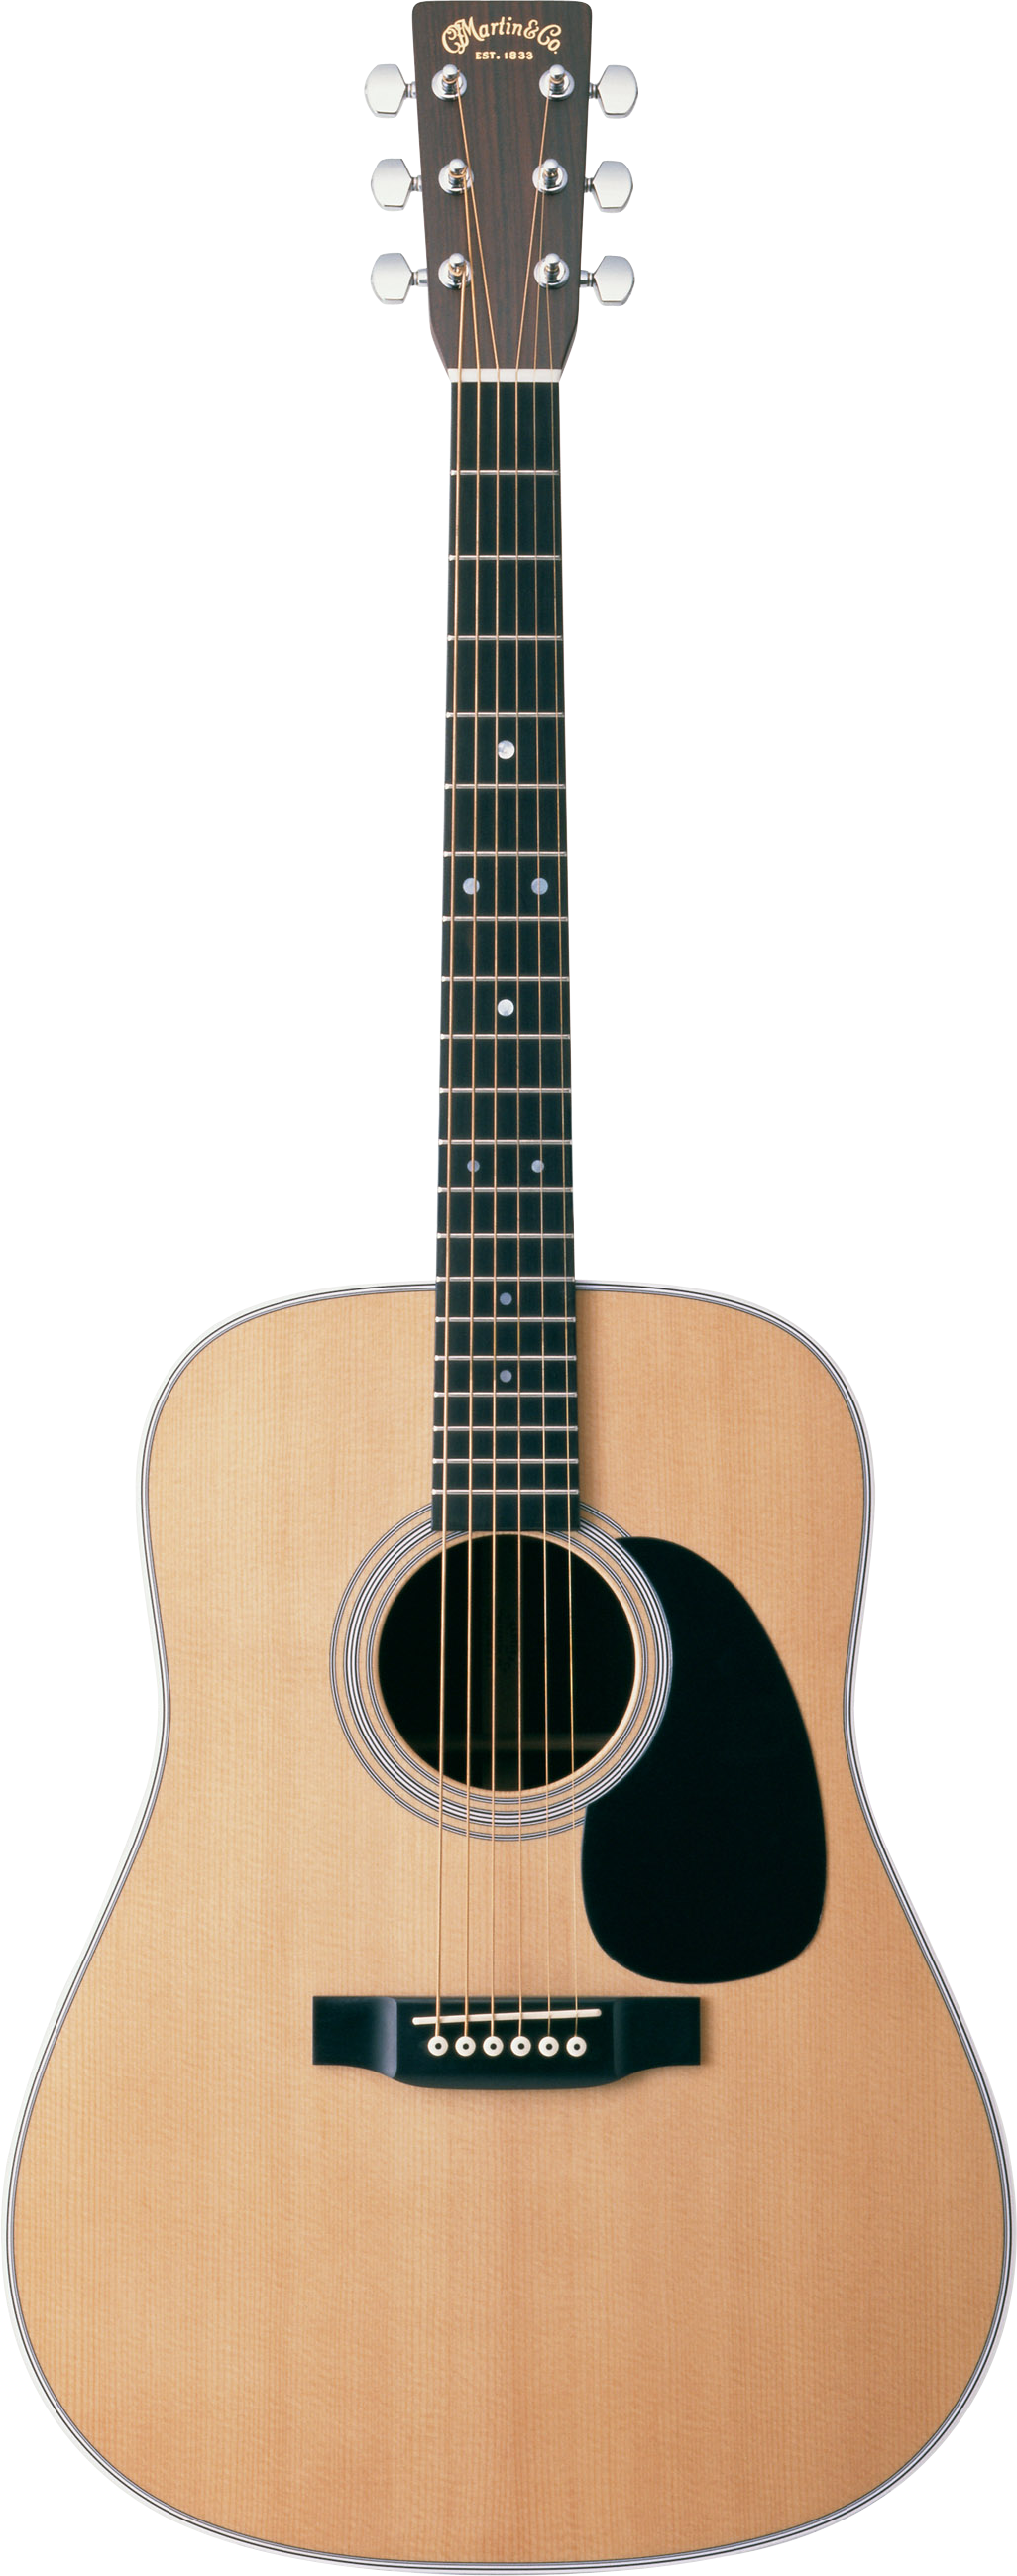 Nylon-String Classical Guitar Free PNG